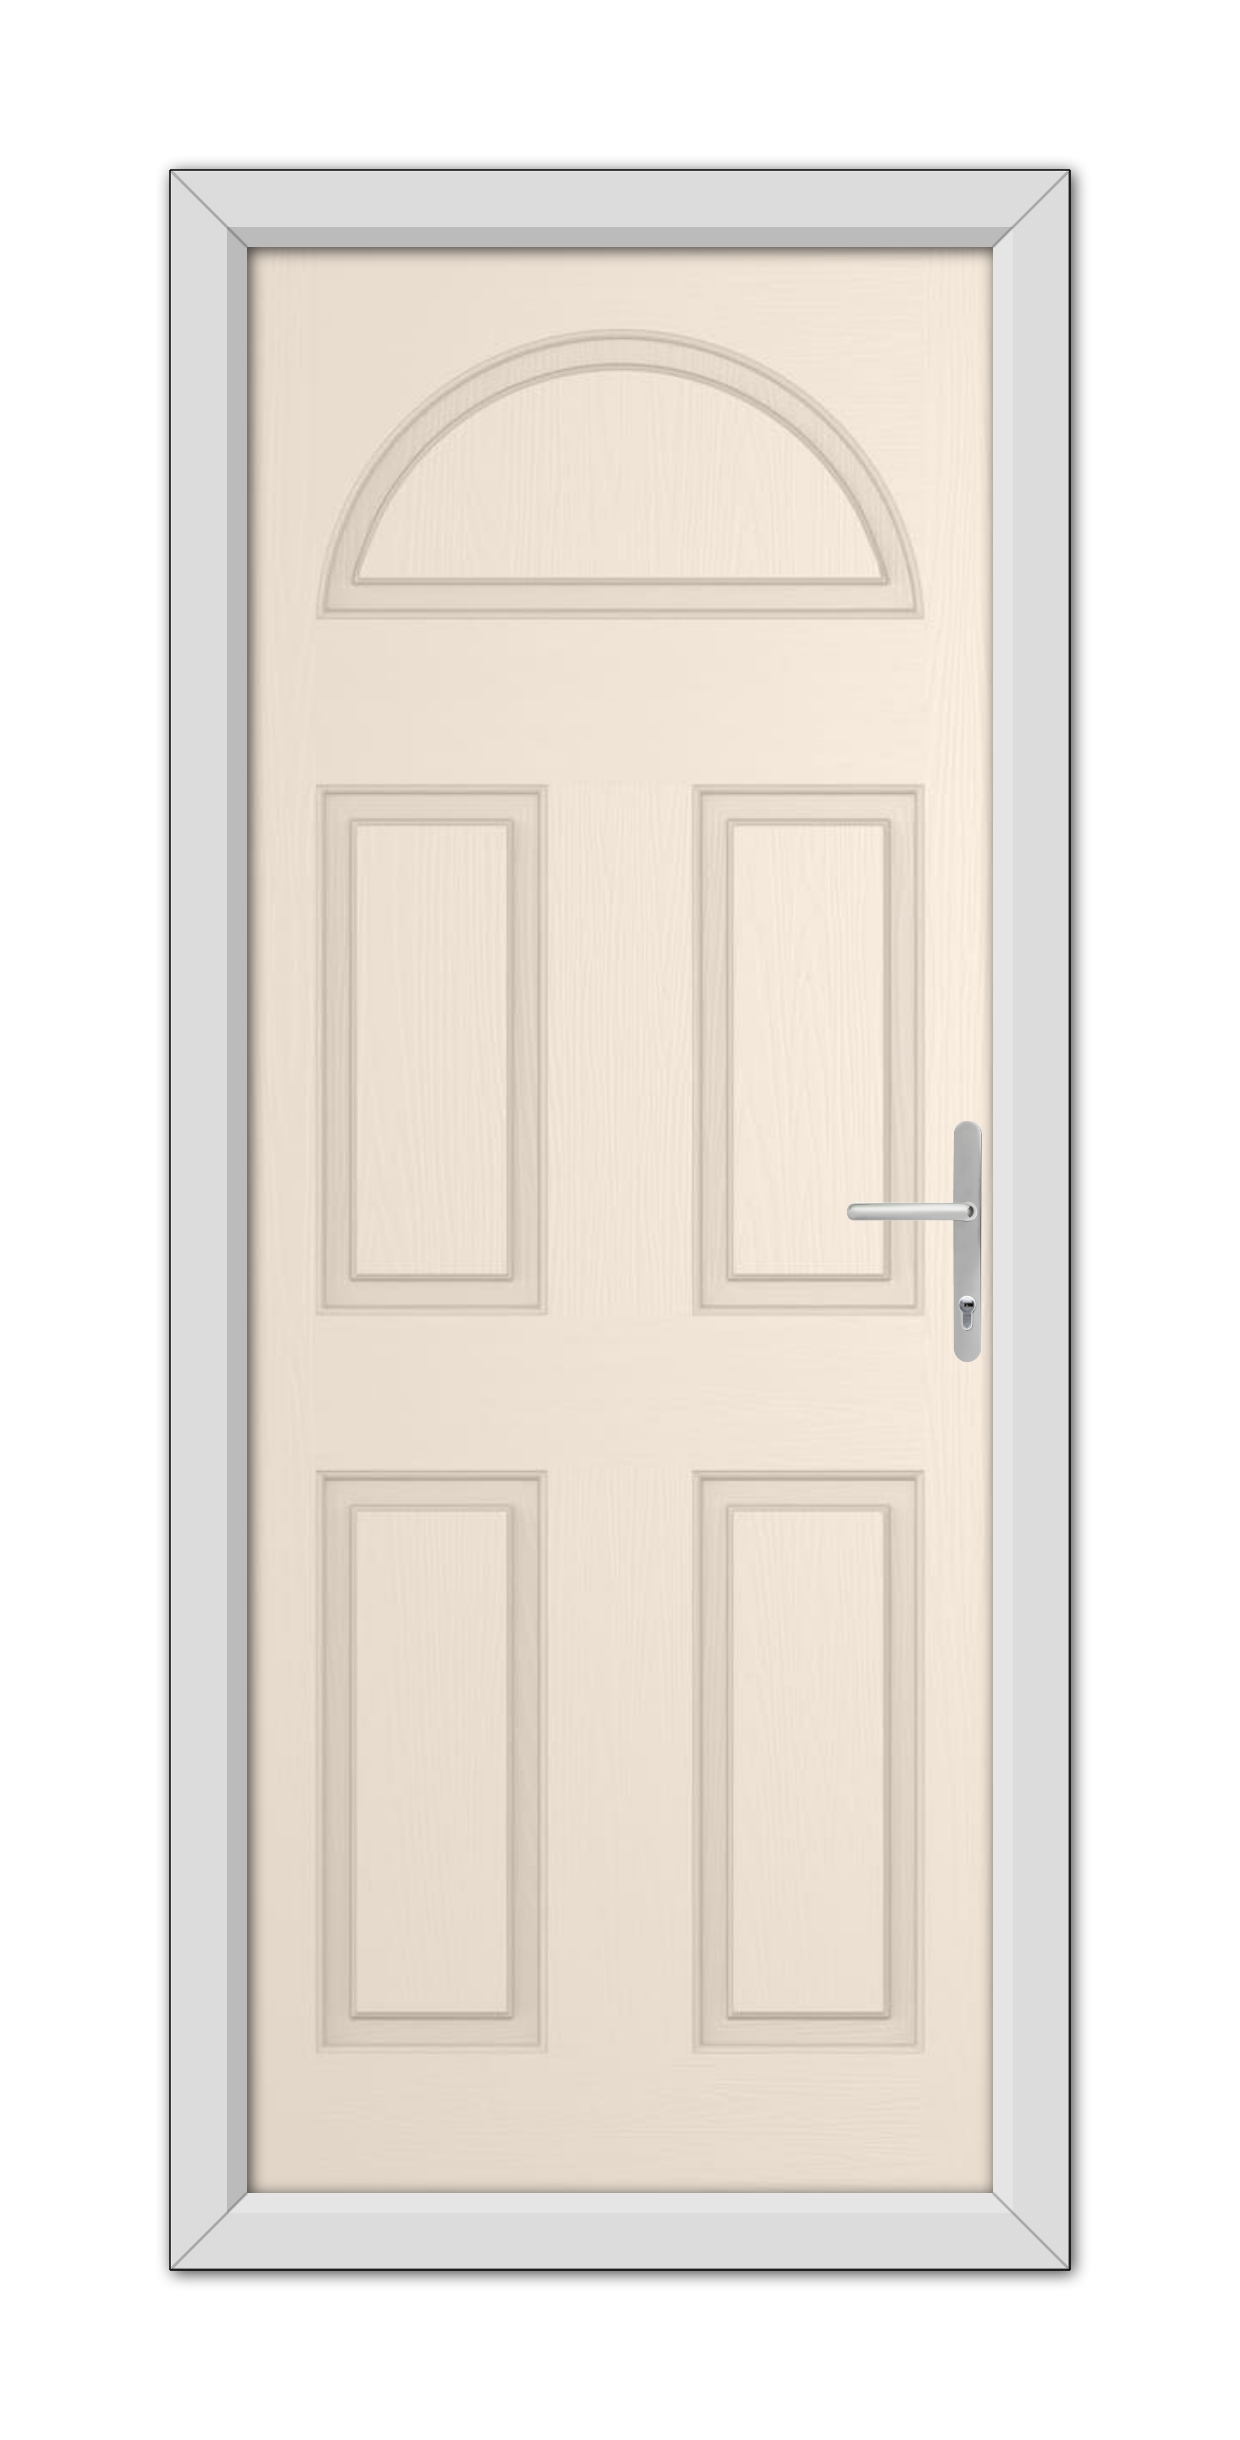 A closed Cream Winslow Solid Composite Door with six panels and an arched window at the top, fitted with a metallic handle, framed by a simple trim.